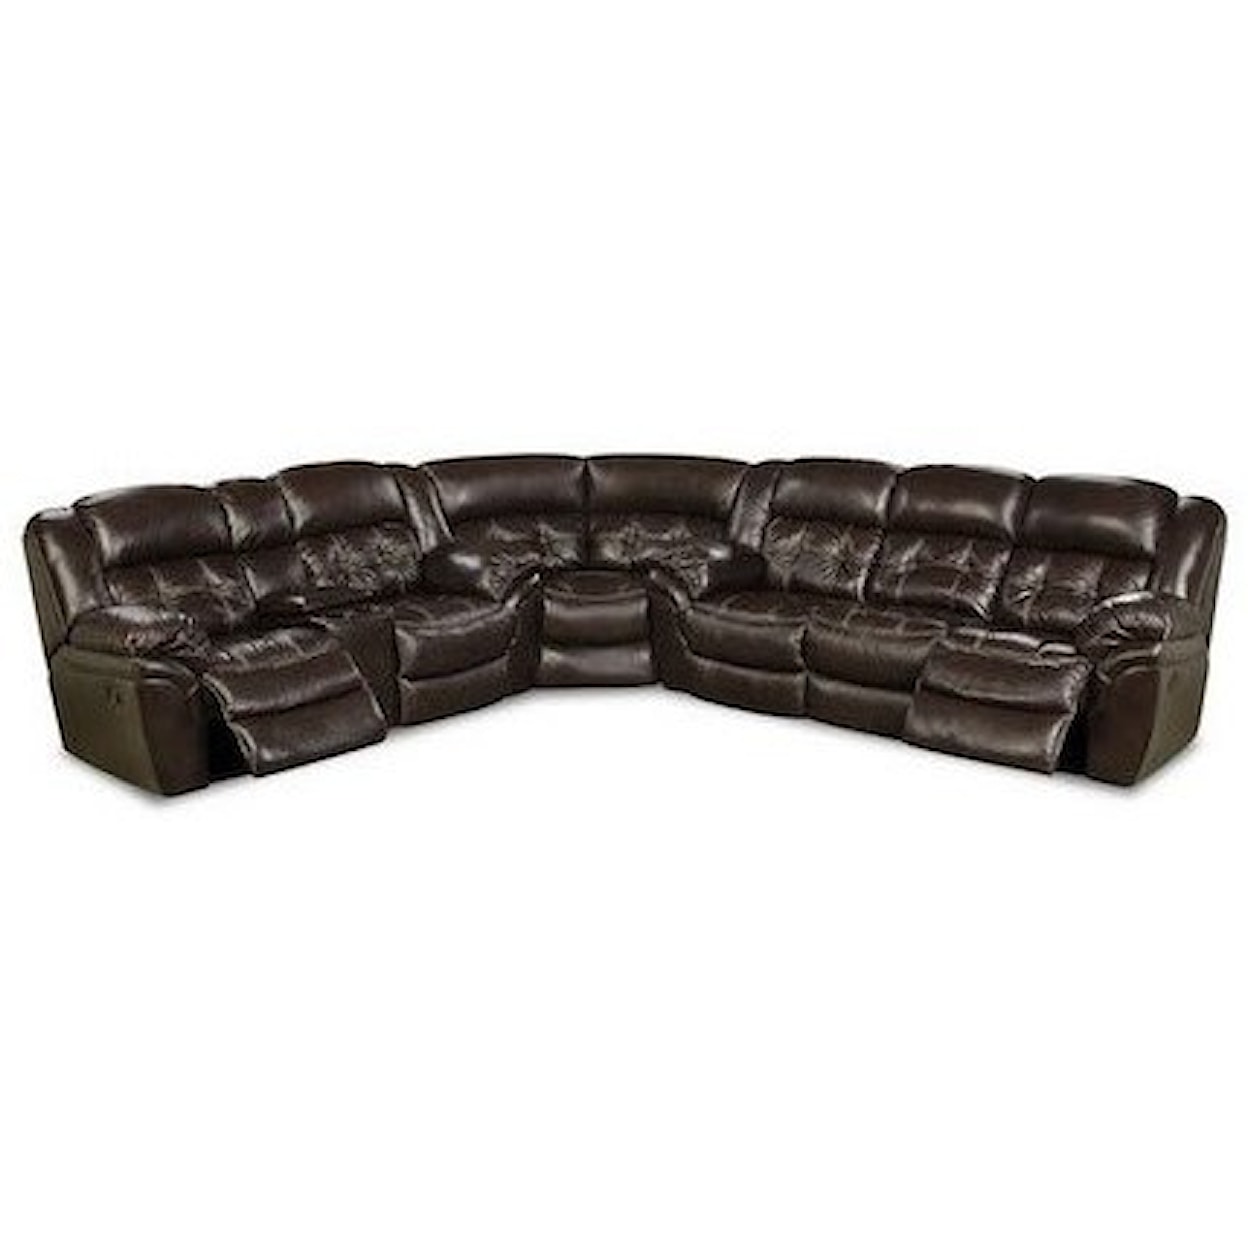 HomeStretch Cheyenne Leather Reclining Sectional